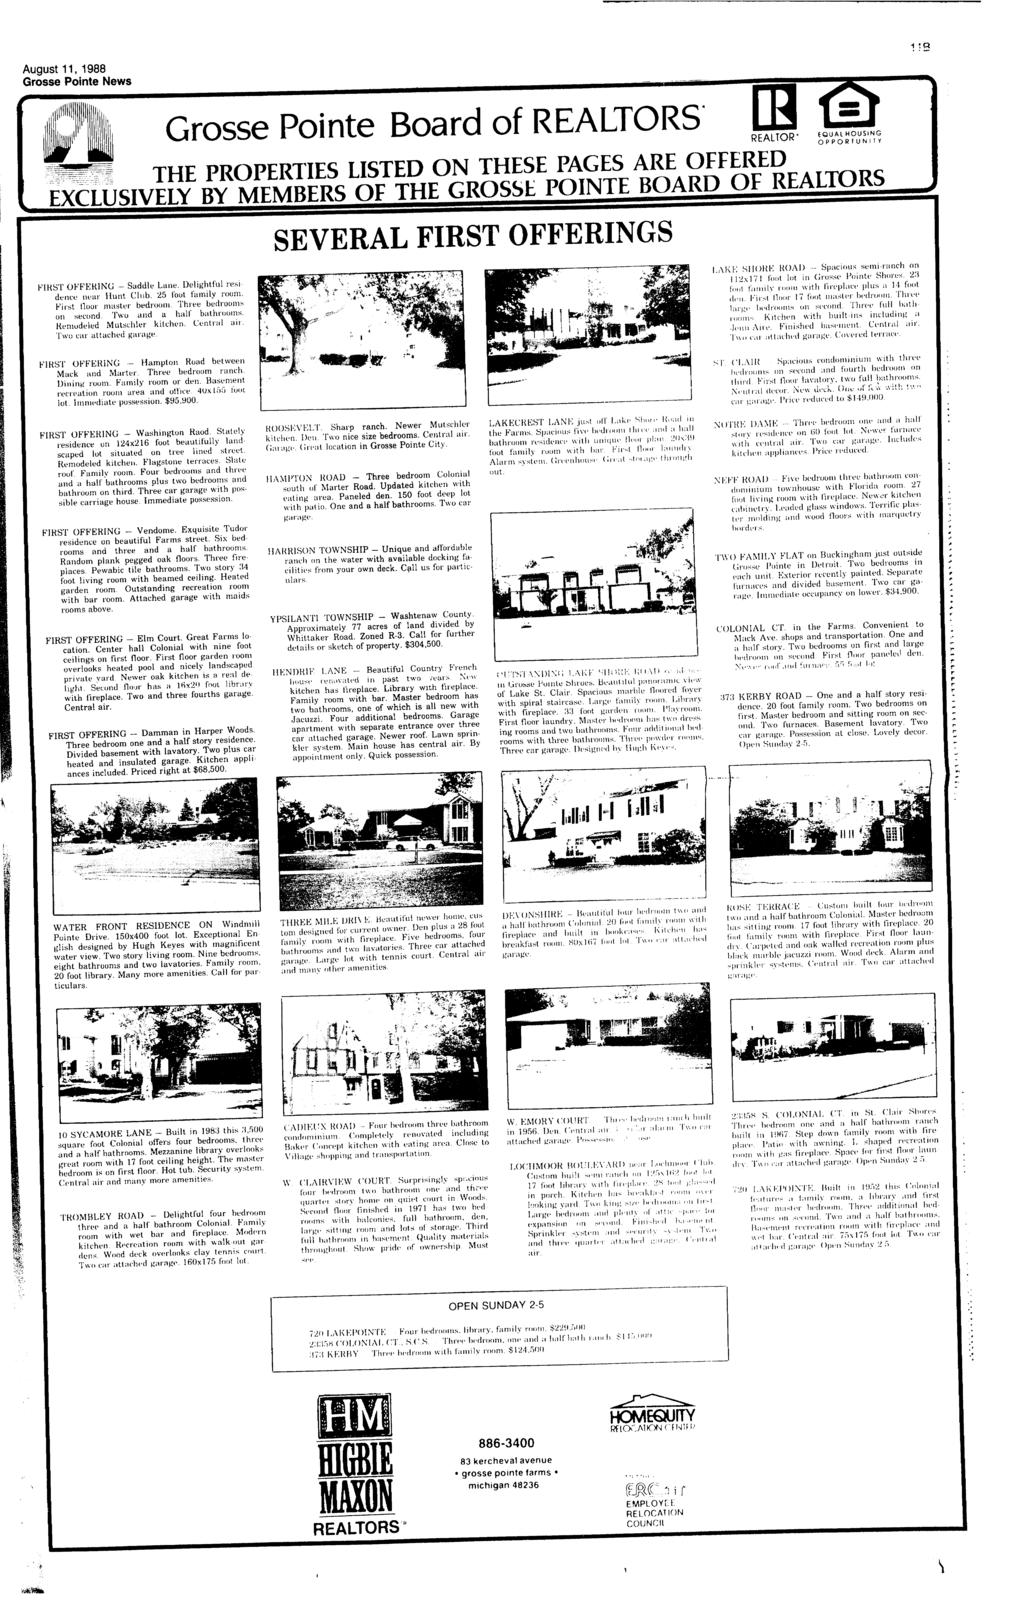 August 11, 1988 Grosse Pointe Board of REALTORS' [B REALTOR' EQUAL HOUSNG OPPORTUNTY THE PROPERTES LSTED ON THESE PAGES ARE OFFERED EXCLUSVELY BY MEMBERS OF THE GROS~E PONTE BOARD OF REALTORS Fms'1'